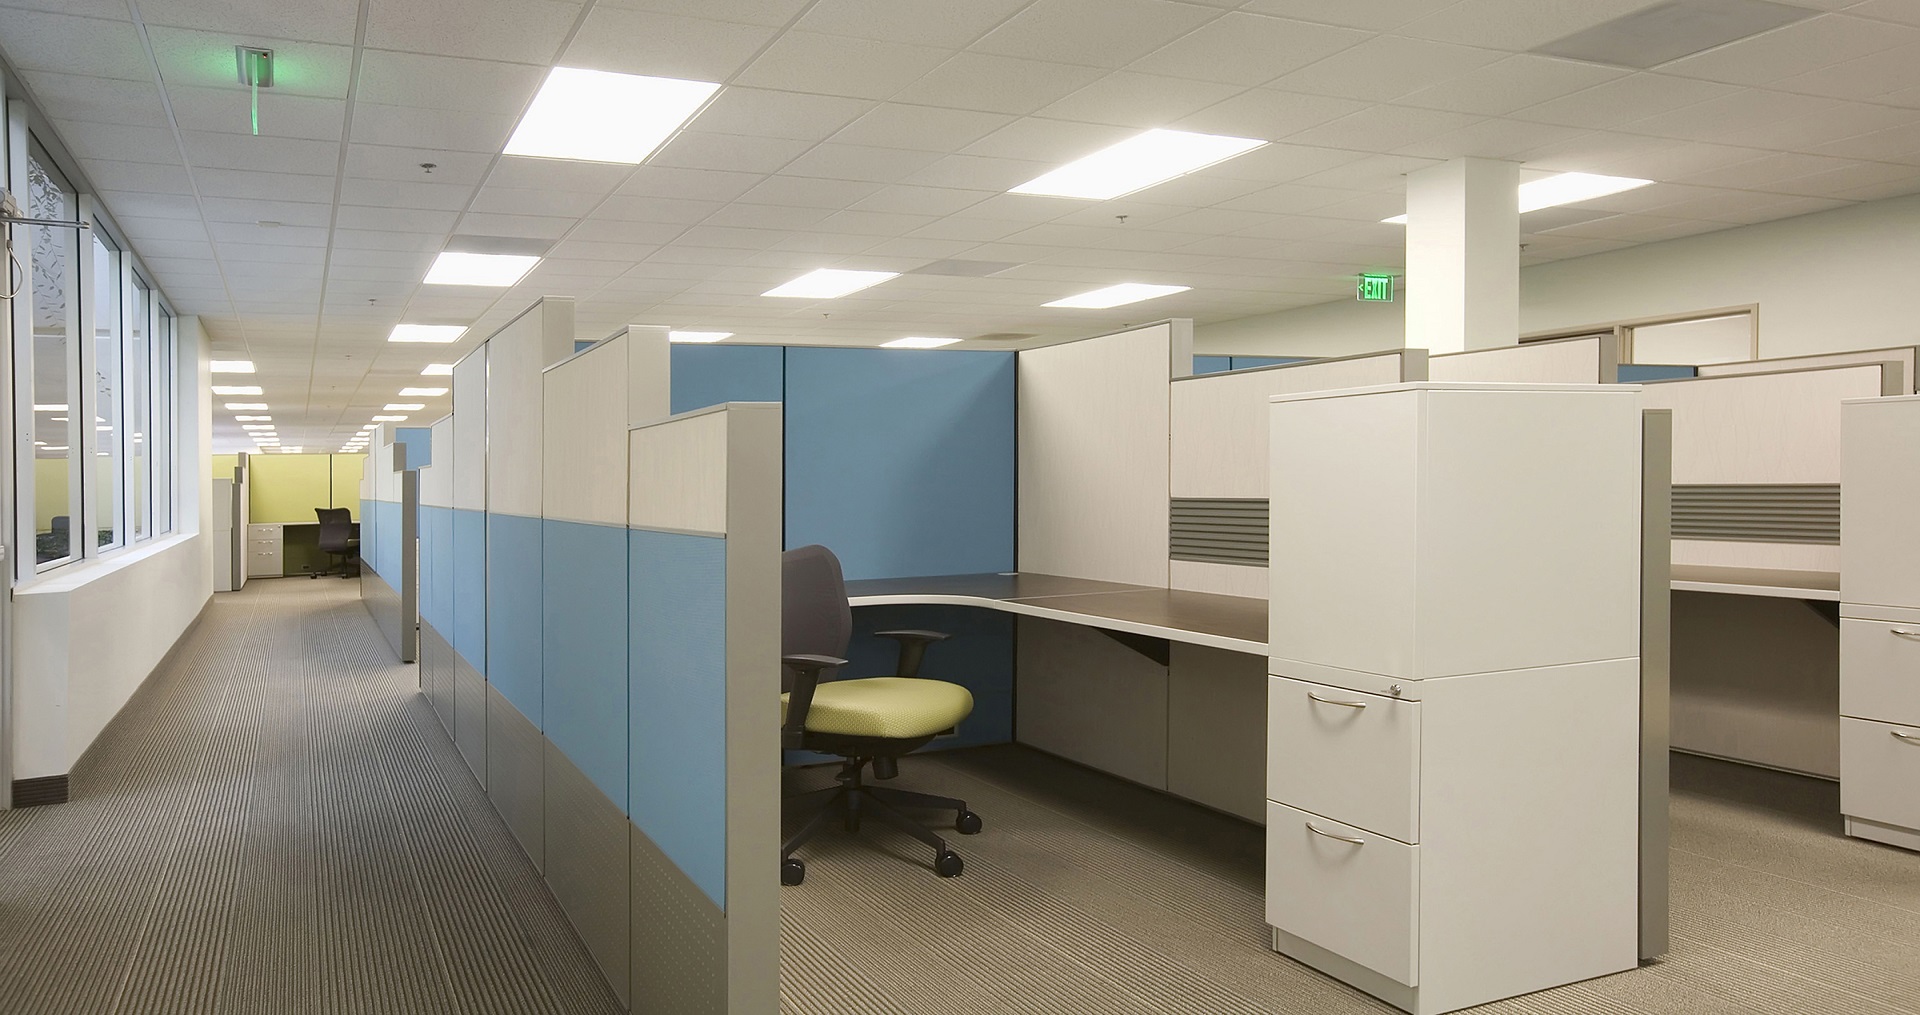 Image of a noffice cubicle